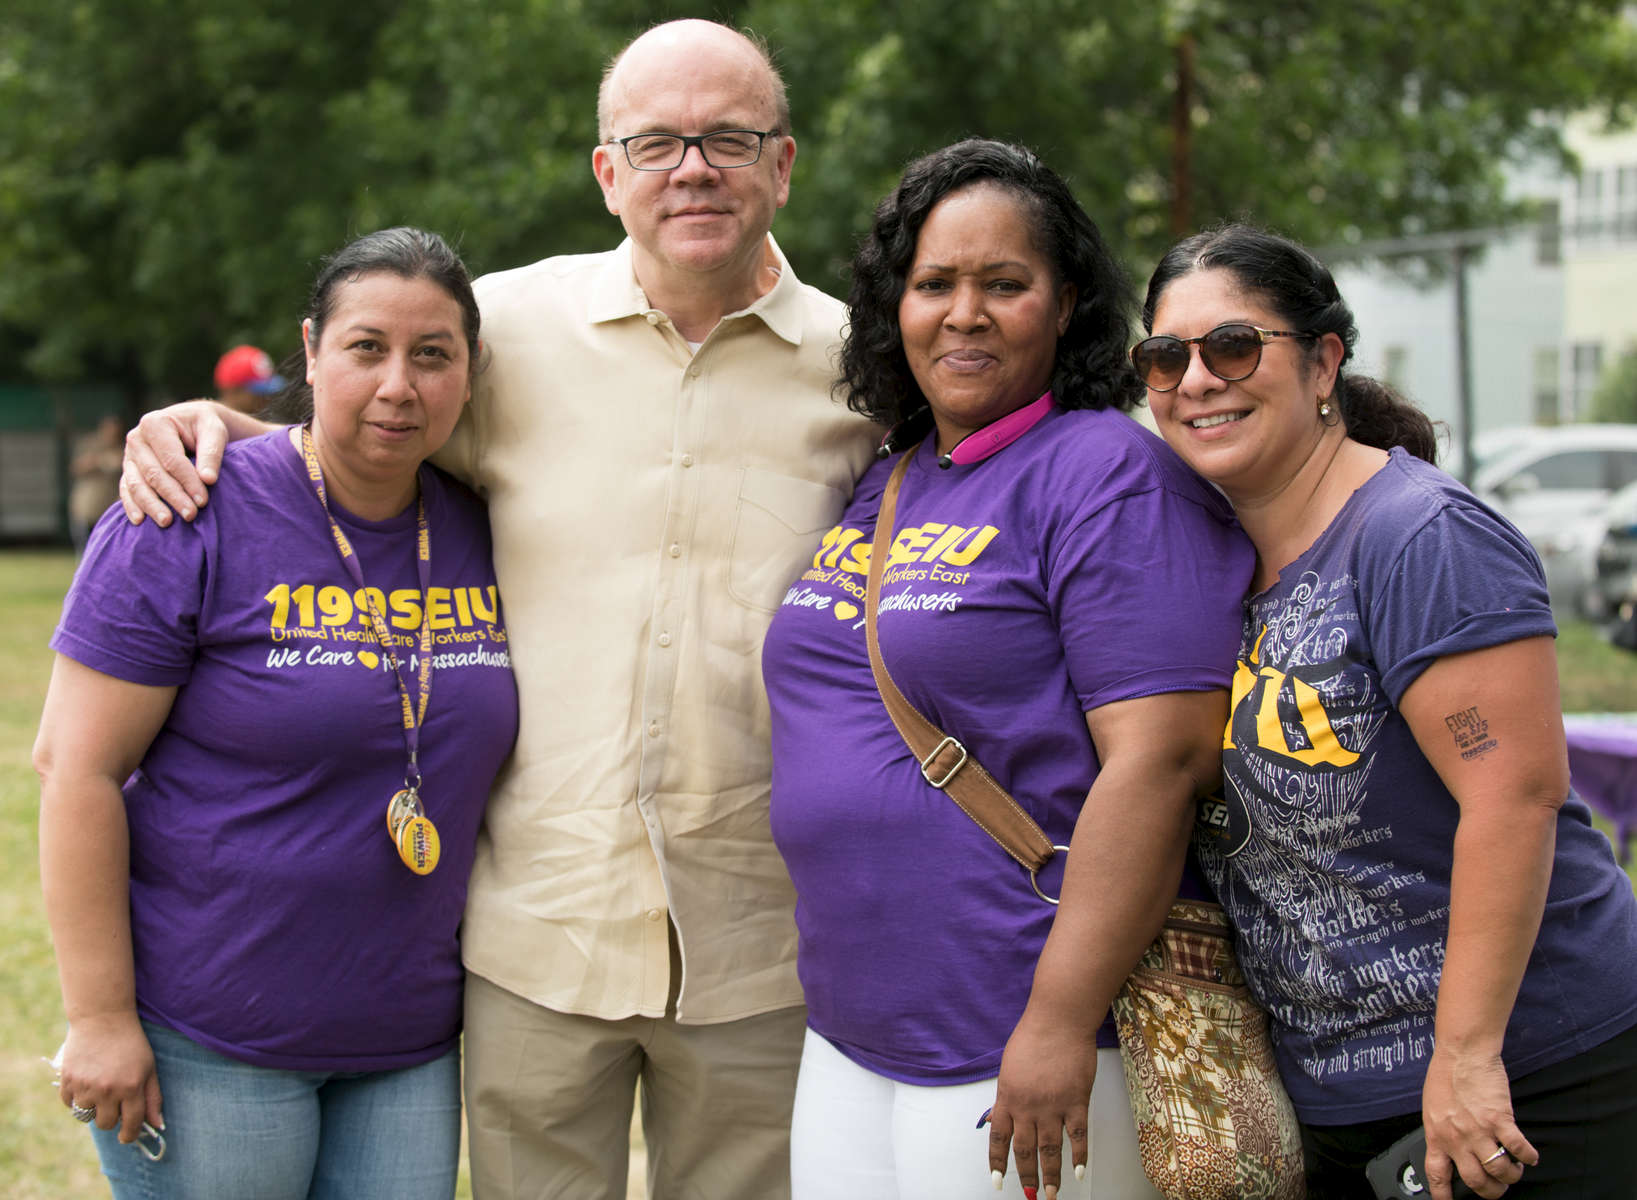 1199 SEIU Healthcare Workers Rising Victory Cookout in Worcester at Crompton Park, Saturday, July 14, 2018. 